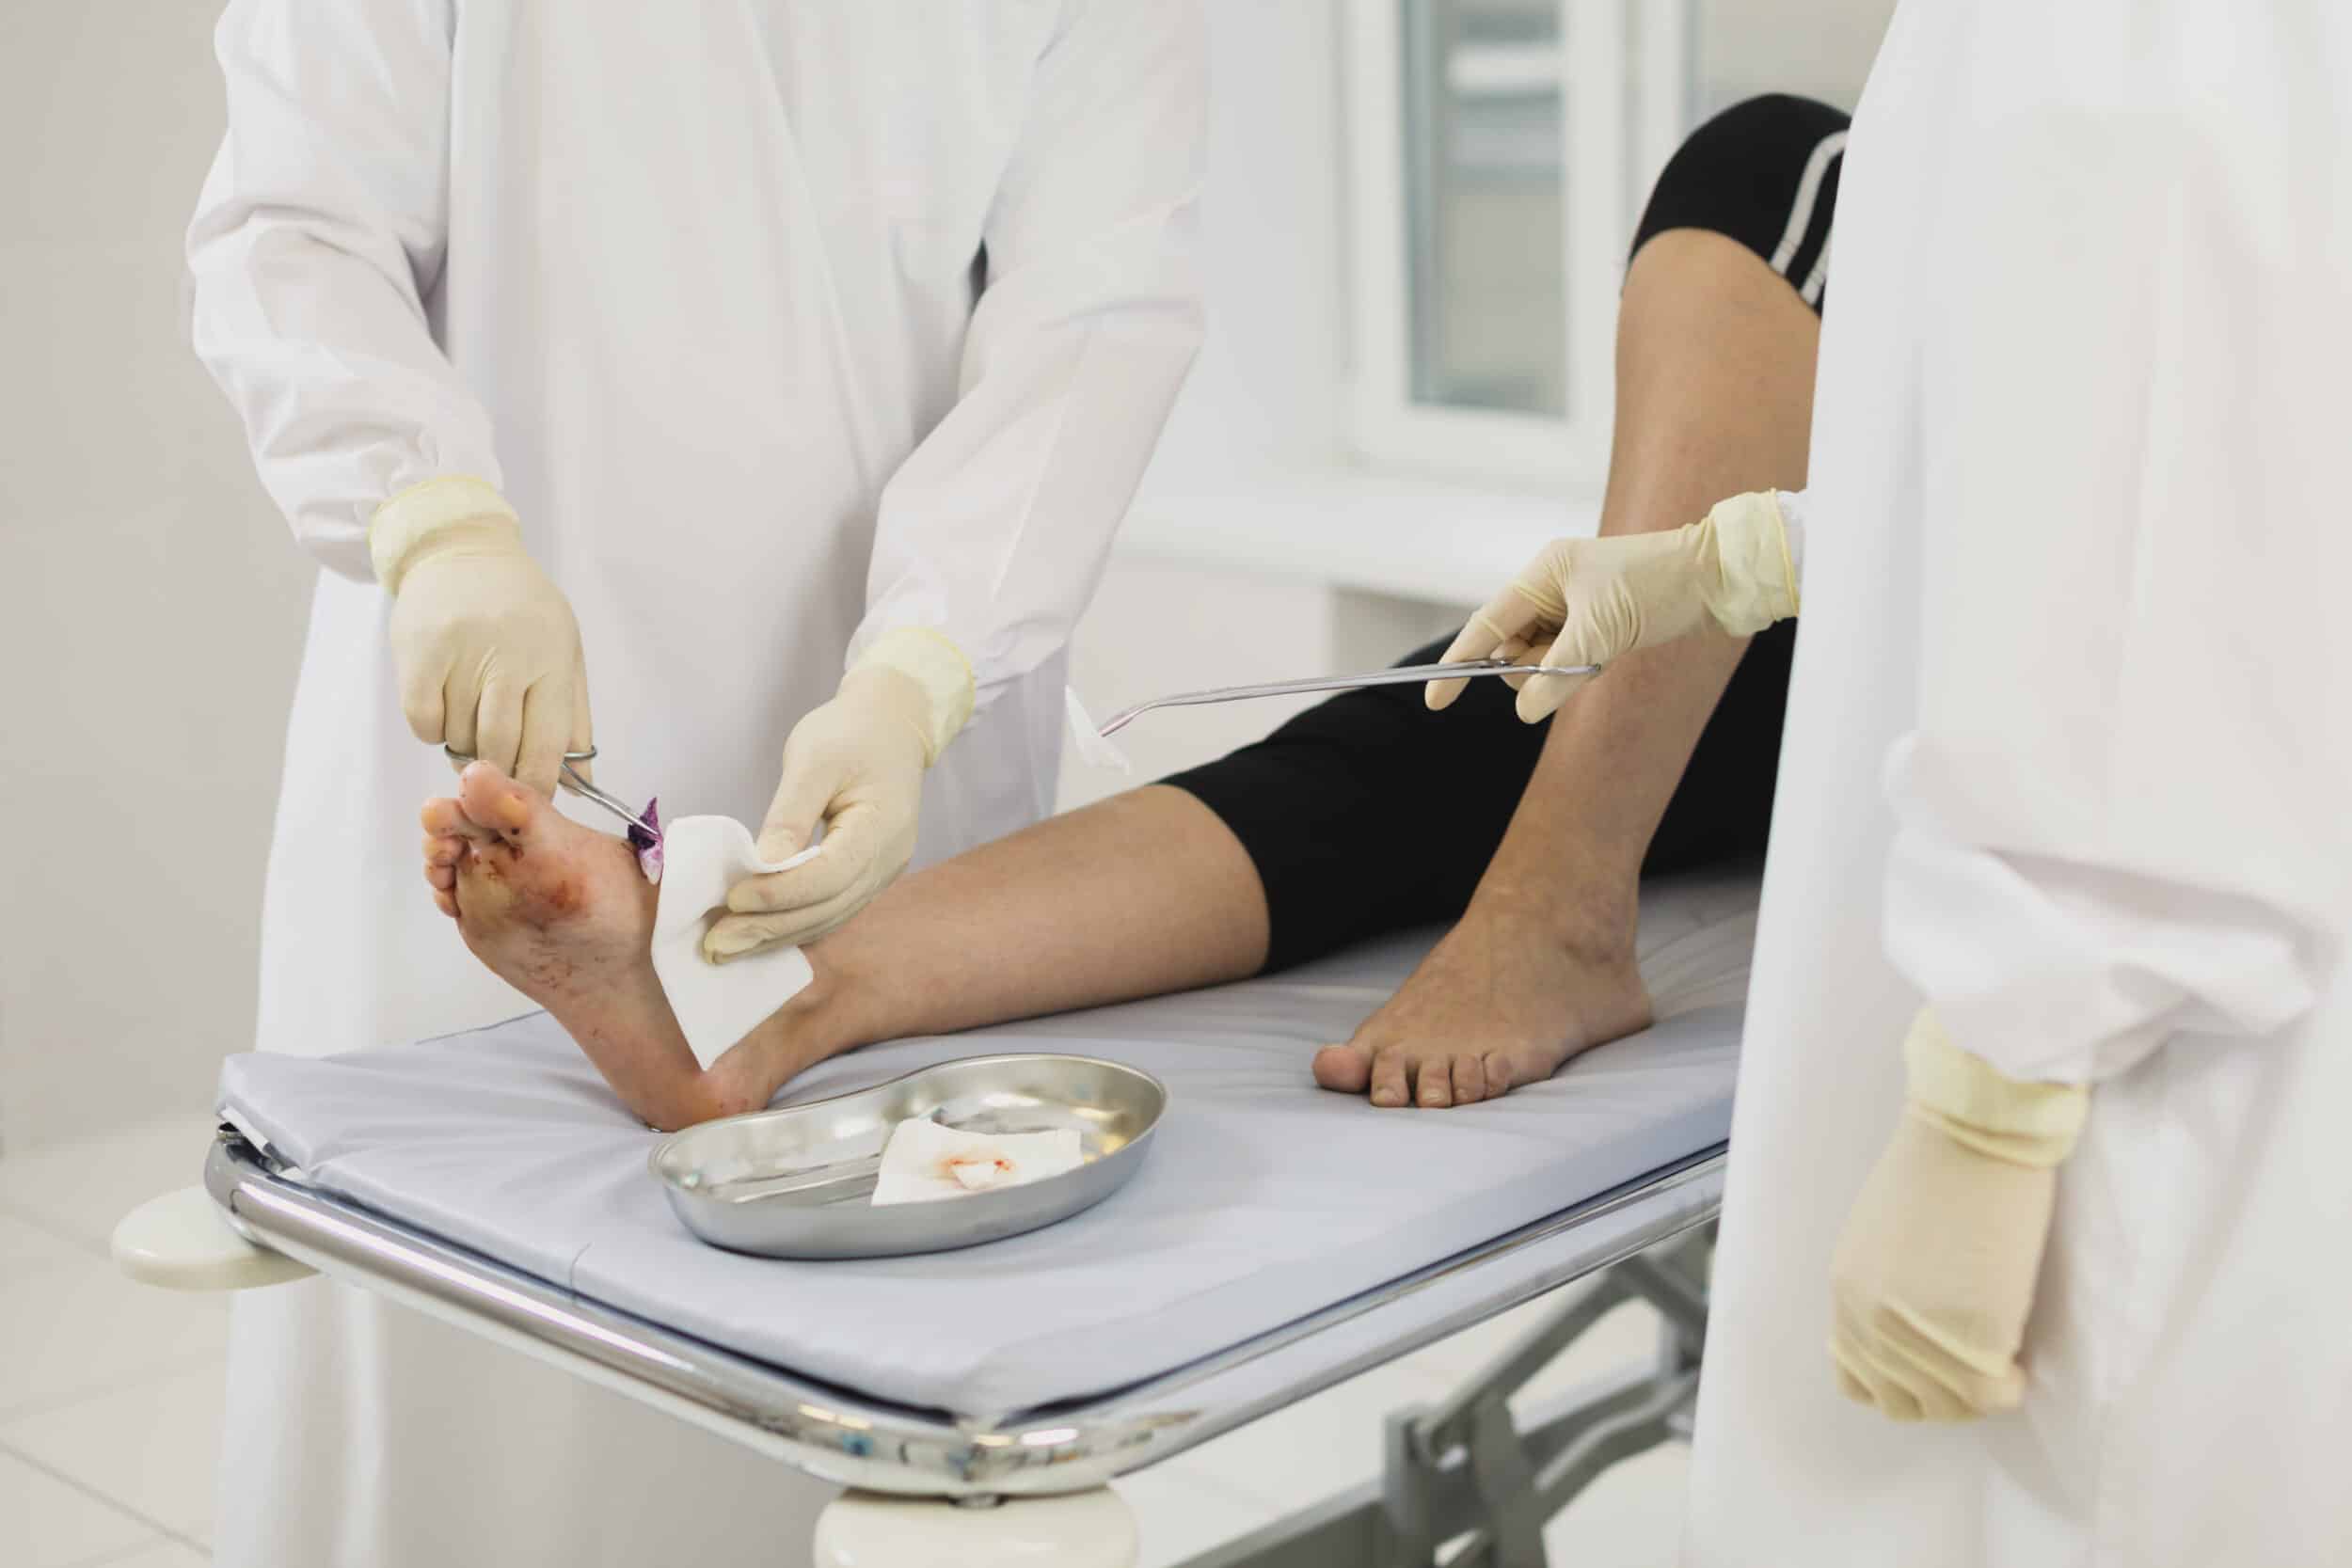 A doctor treating a laceration on a patient’s leg